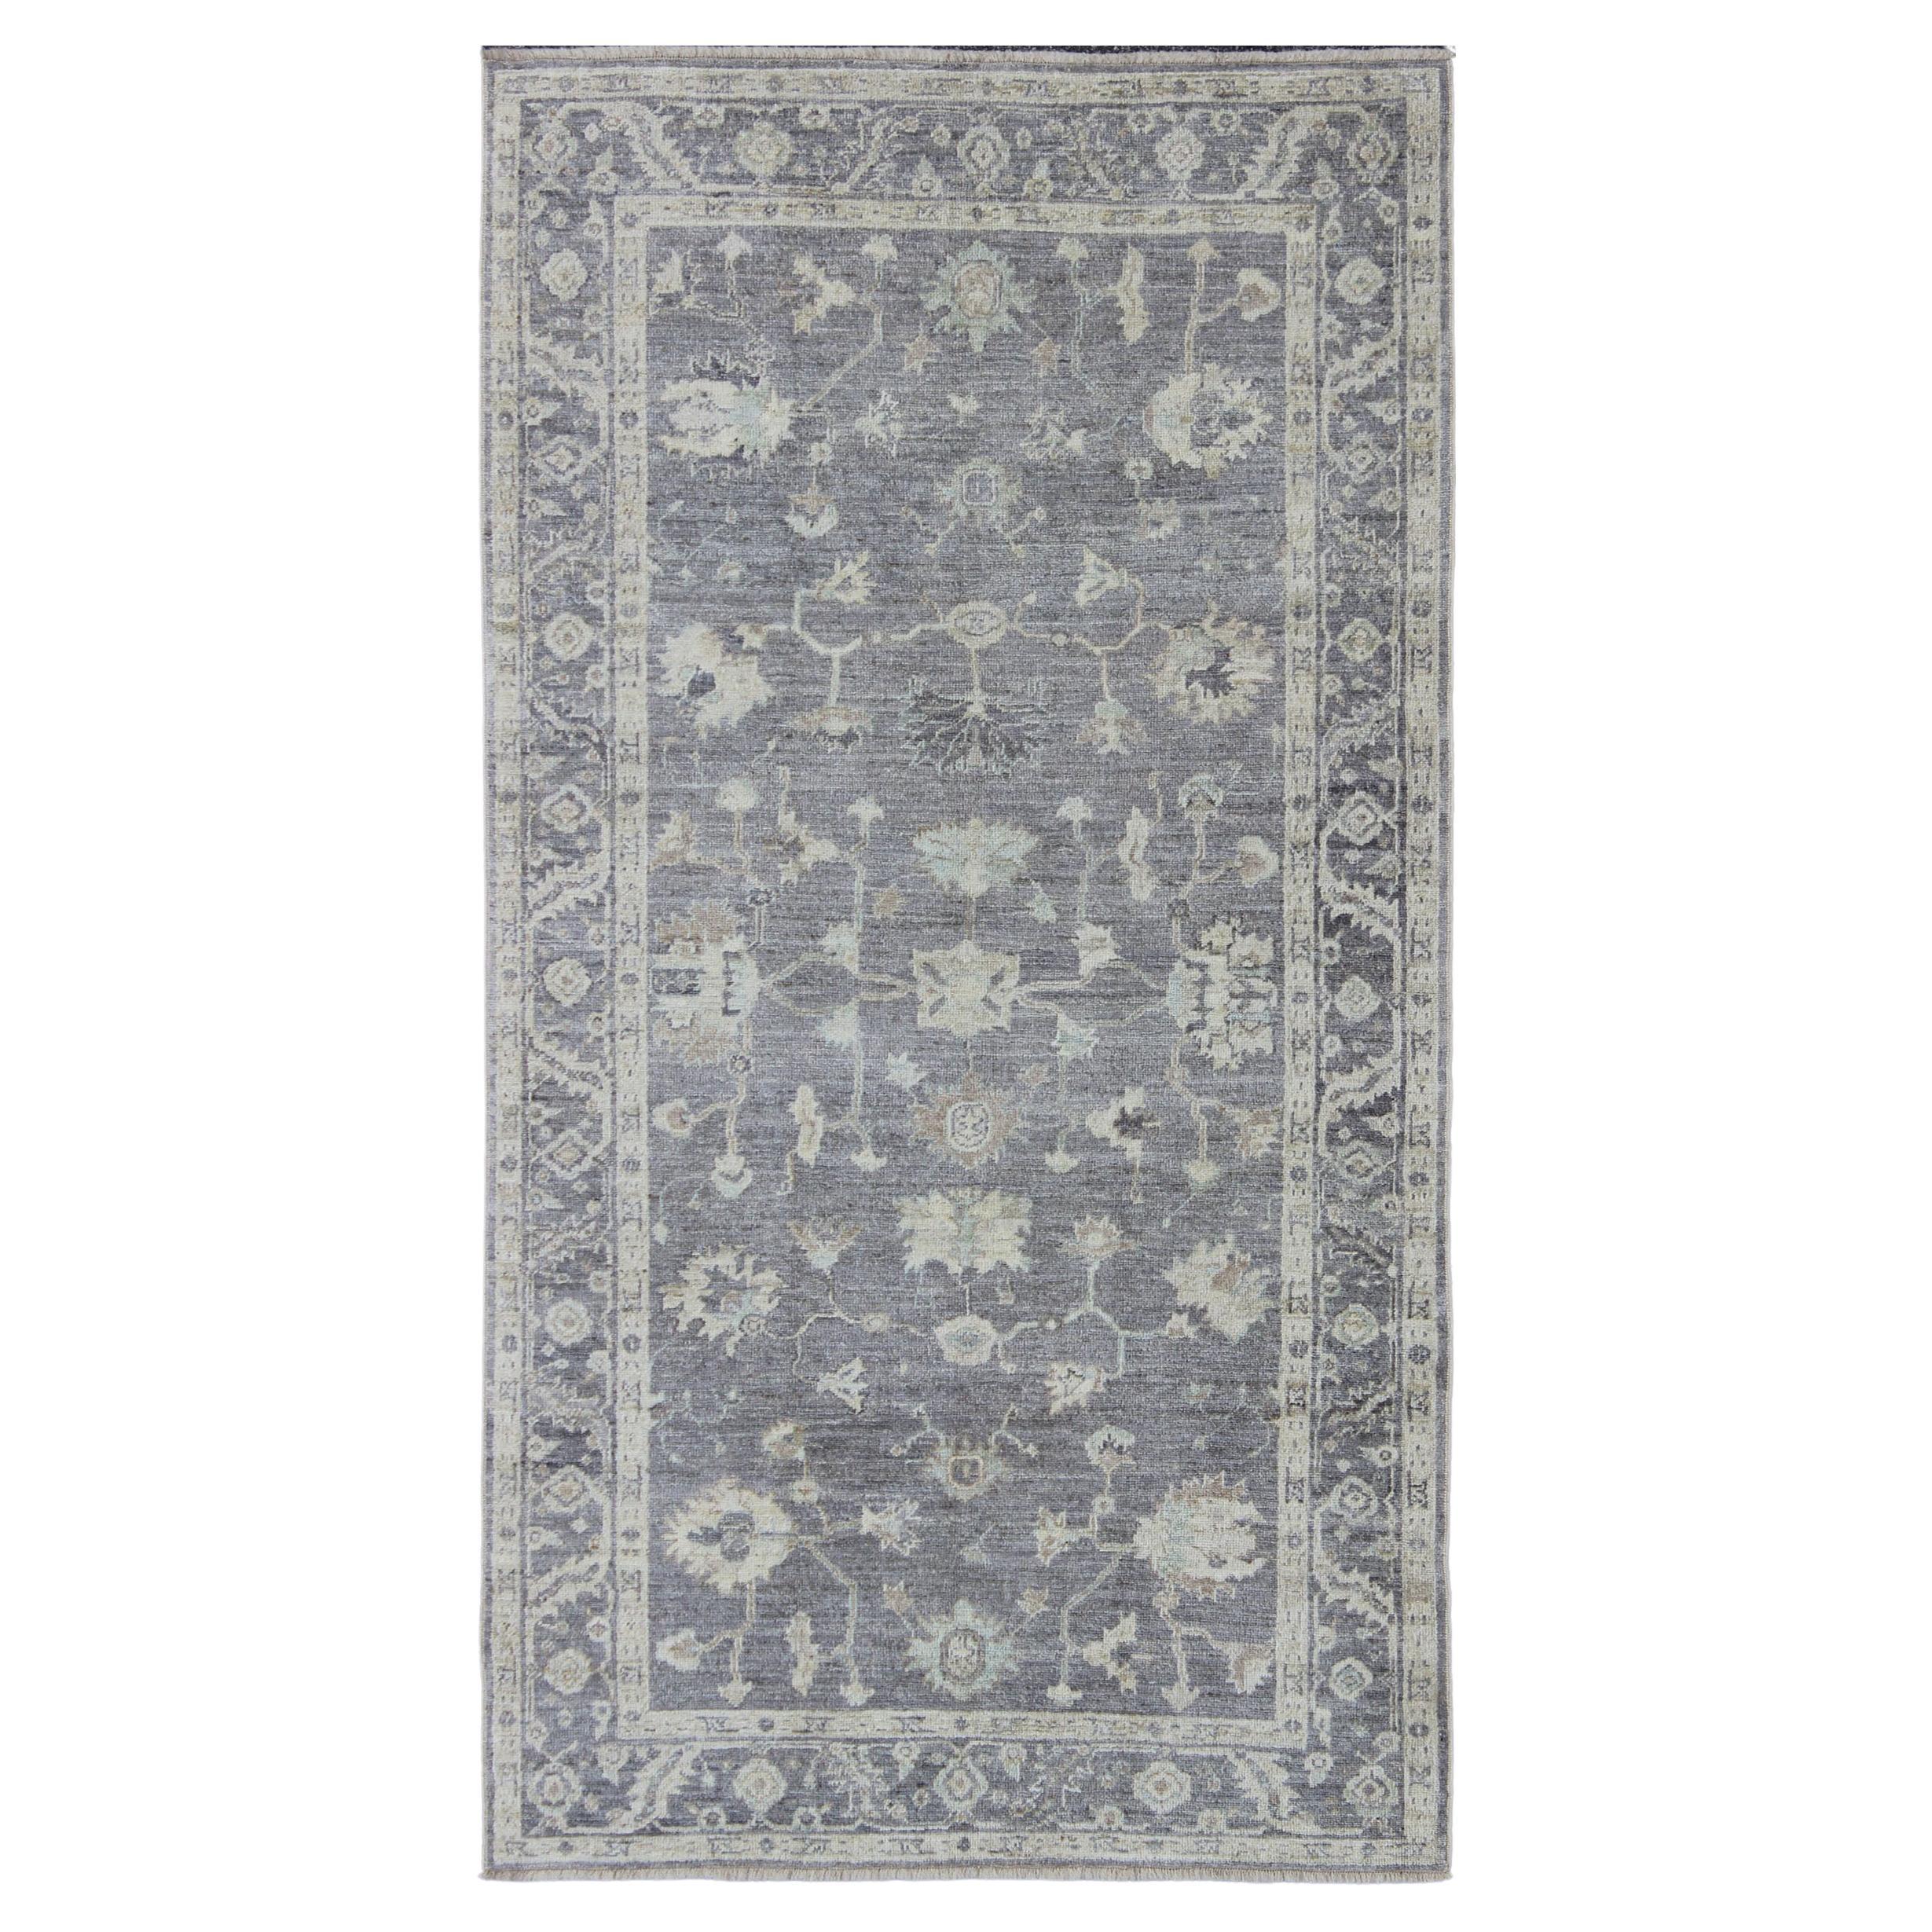 Angora Oushak Turkish Gallery Rug in Shades of Gray, Ivory, Silver For Sale